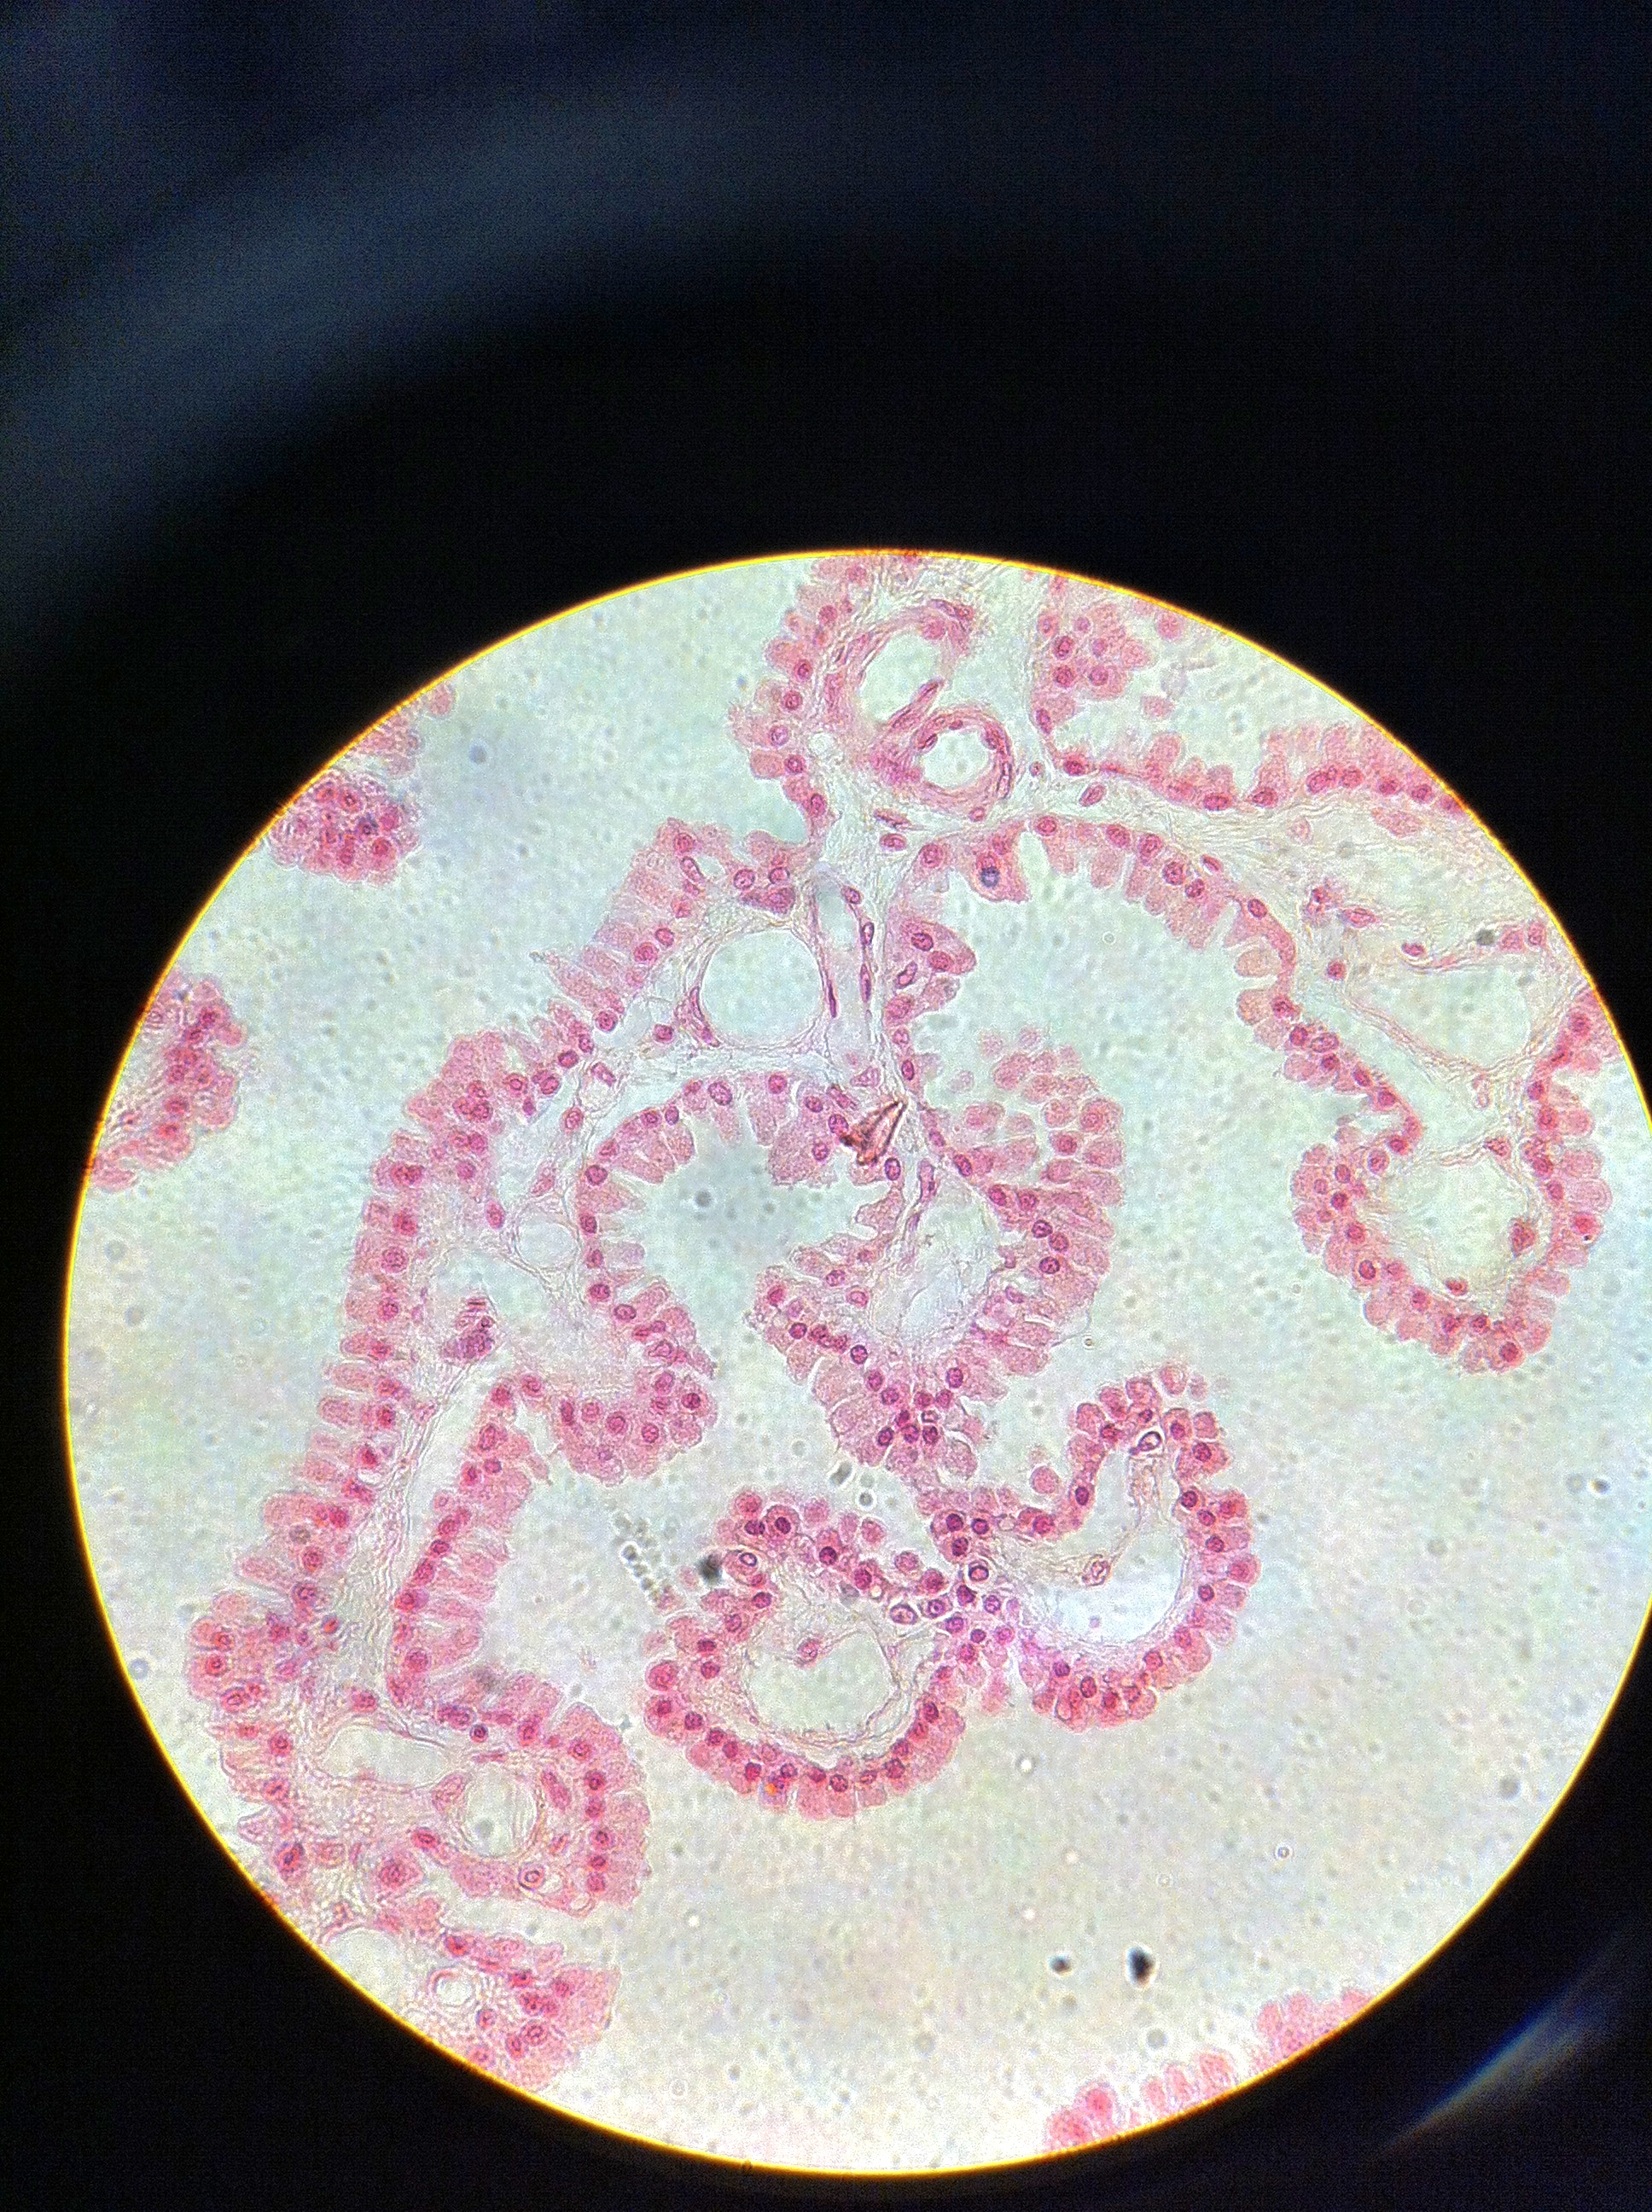 Ependymal Cells 400X